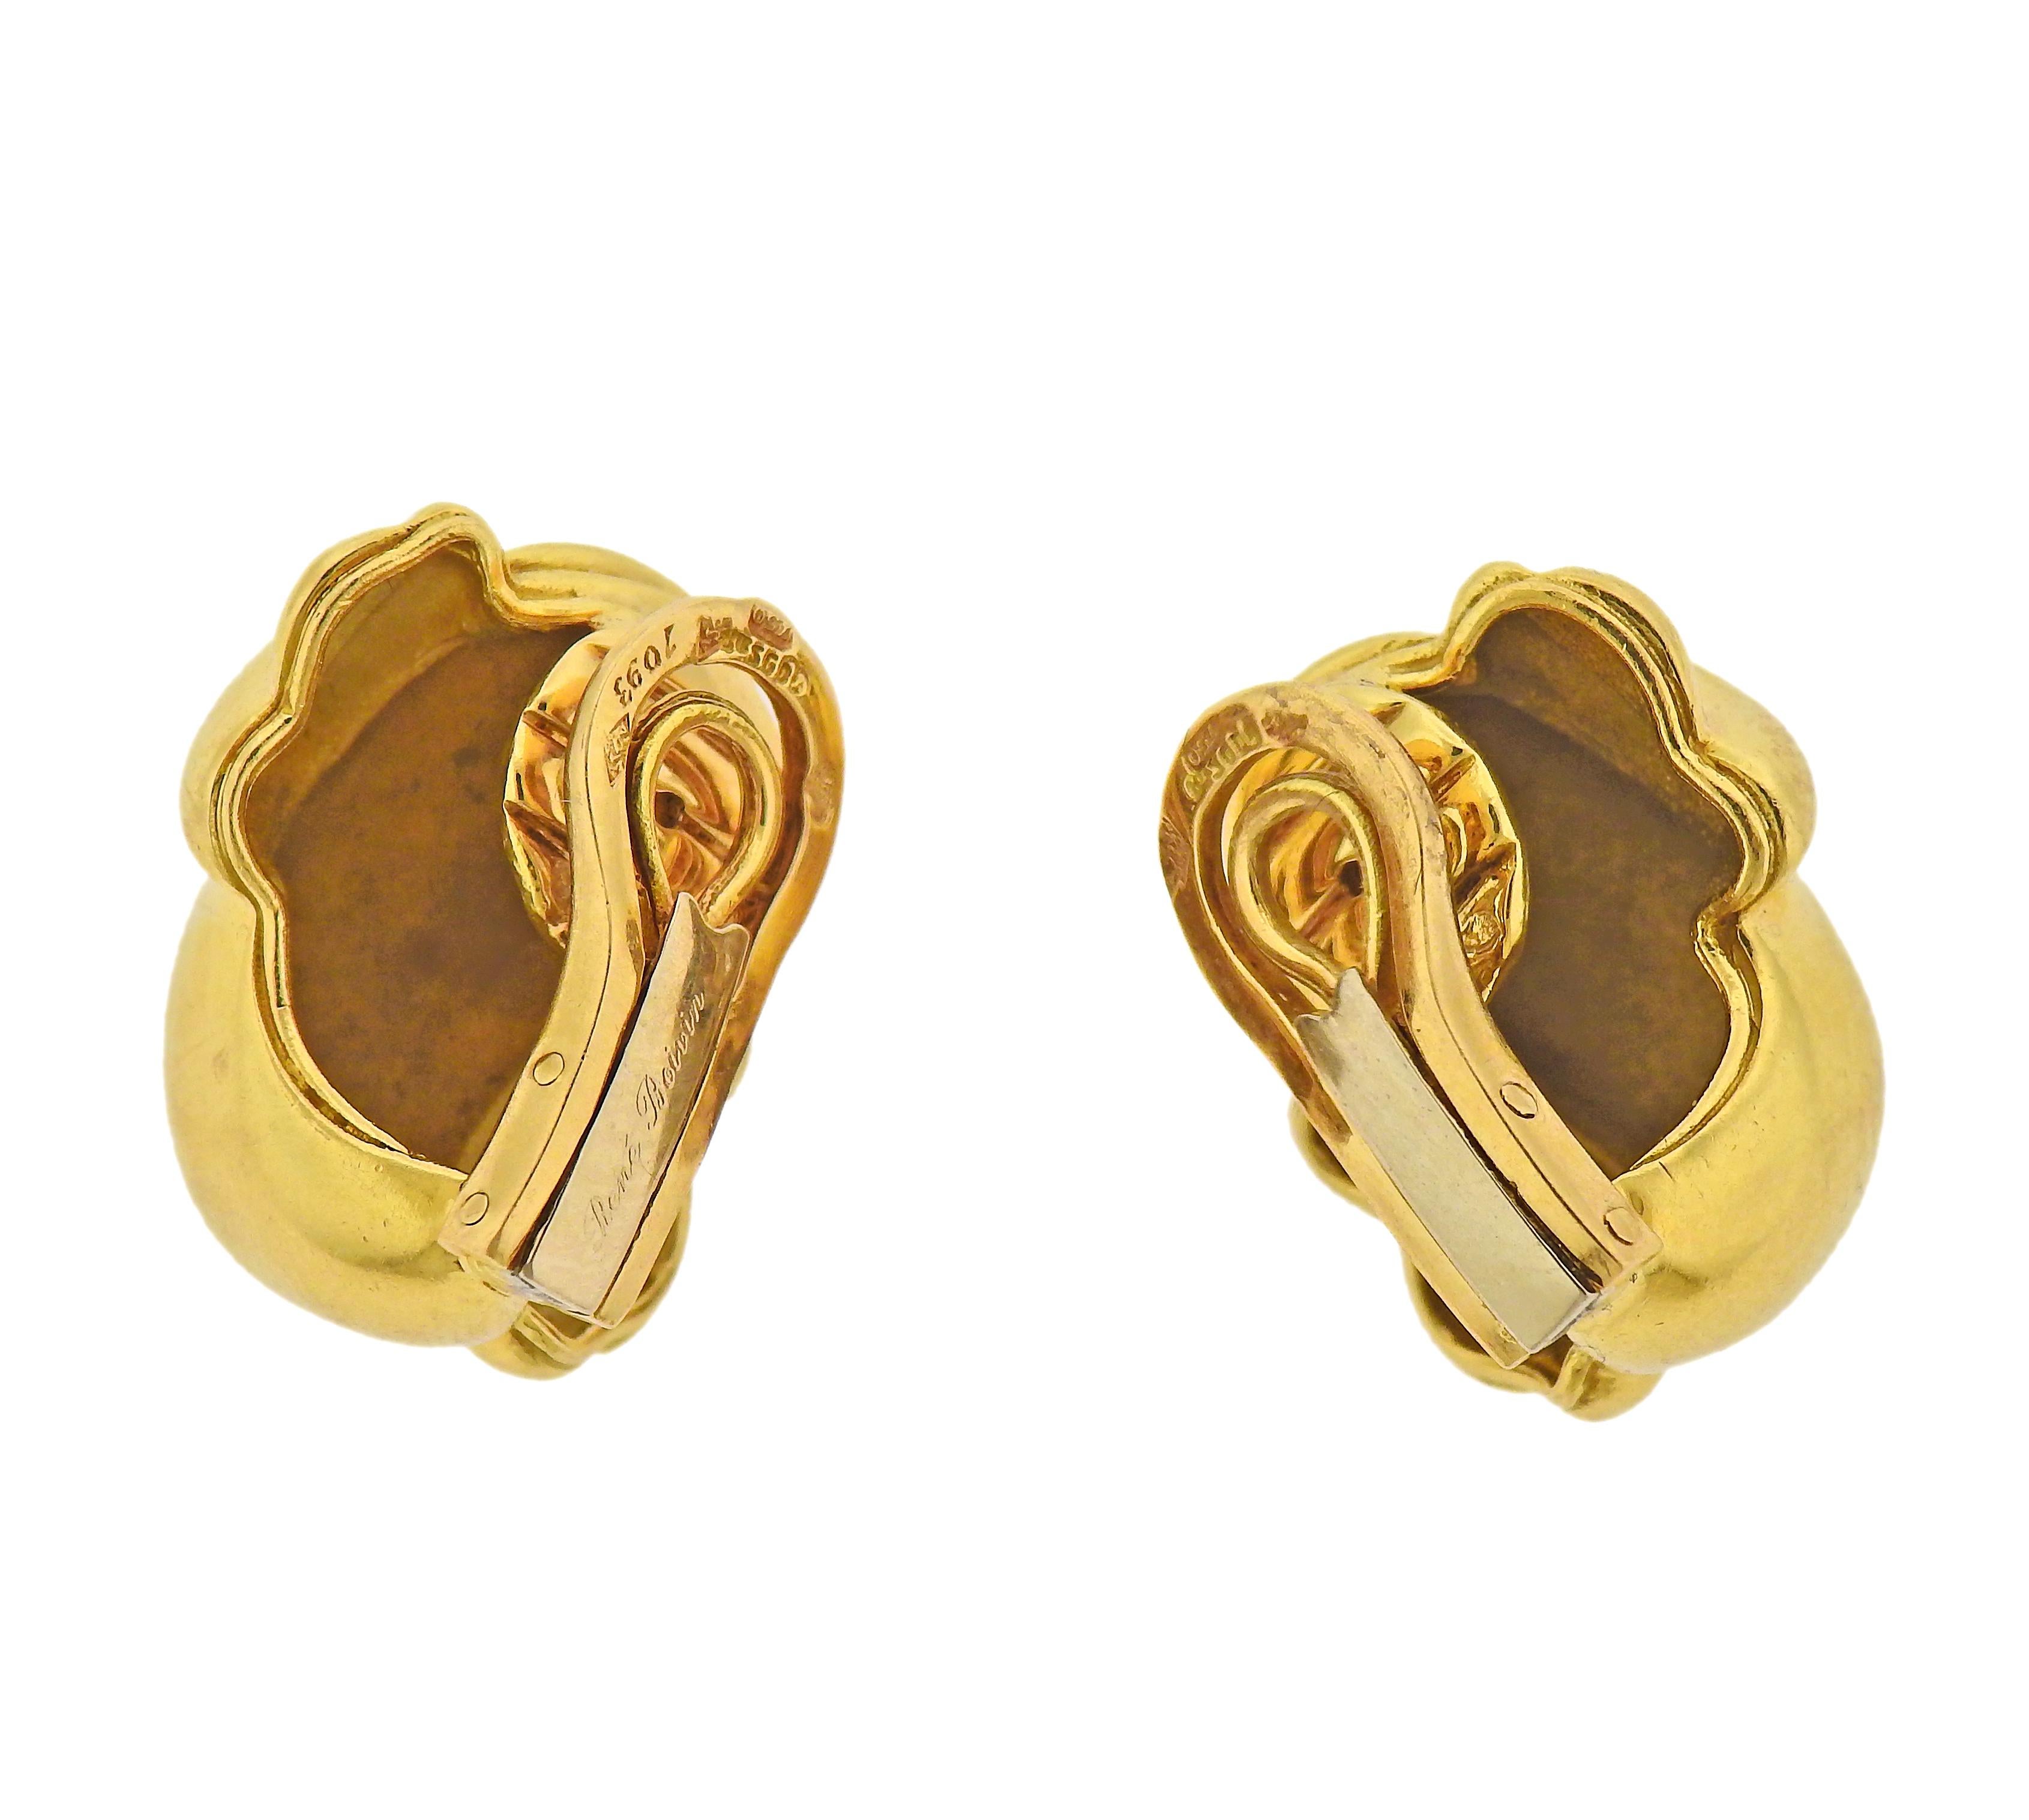 Pair of 18k yellow gold earrings by Rene Boivin.  Earrings measure 21mm x 22mm. Makes Rene Boivin, 650, French marks and 1093. Weight - 20.3 grams.